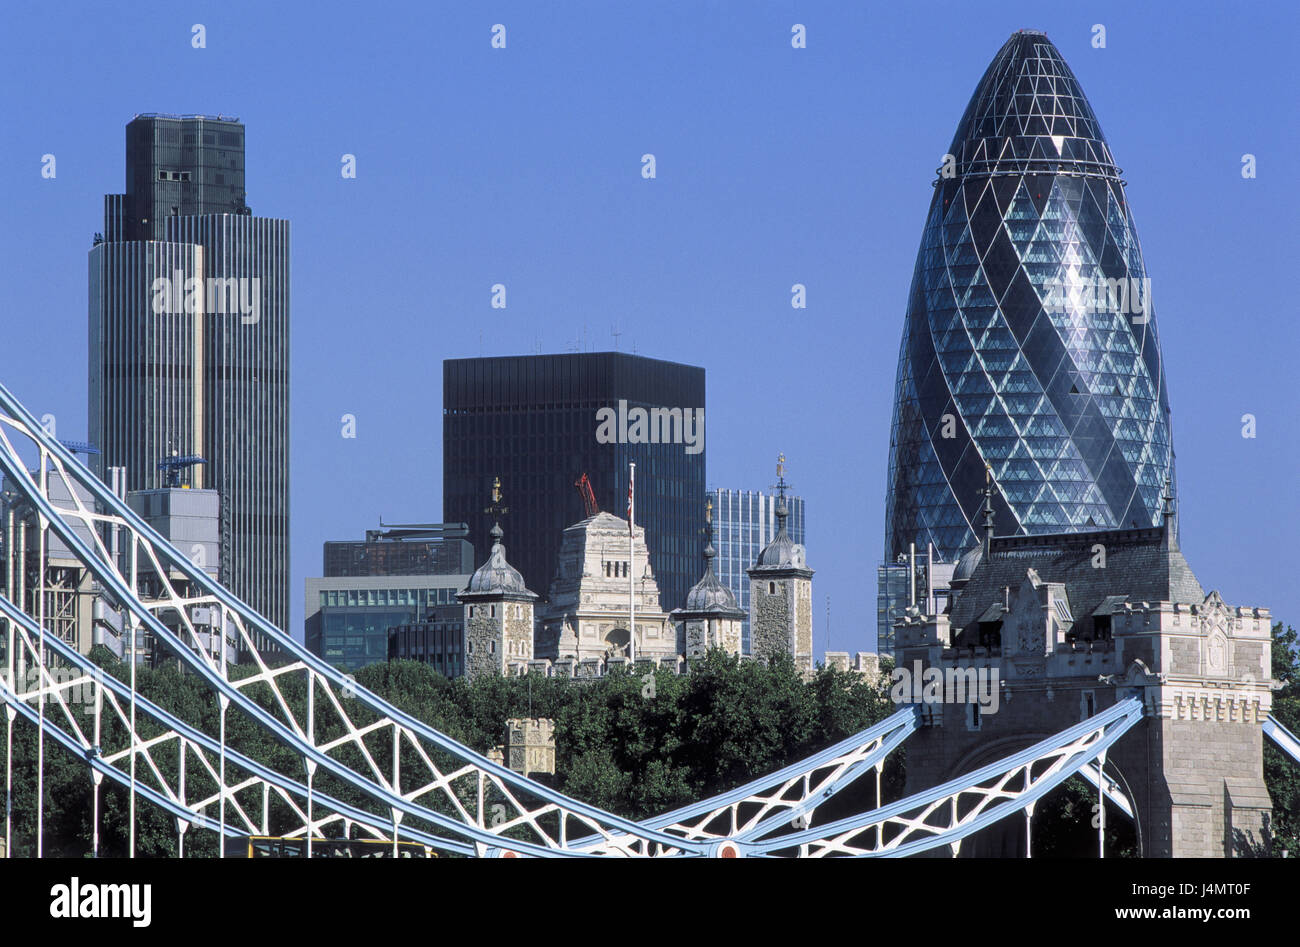 Great Britain, England, London, town view, high rises, Swiss Re Headquarters Europe, the United Kingdom, Greater London, town, capital, place of interest, architecture, structure, landmark, office building, high-rise office block, business centre, 30 pieces Mary Axe, Swiss Re Tower, builds in 2000 - in 2003, height 180 m, glass steel construction, Tower Bridge, detail Stock Photo